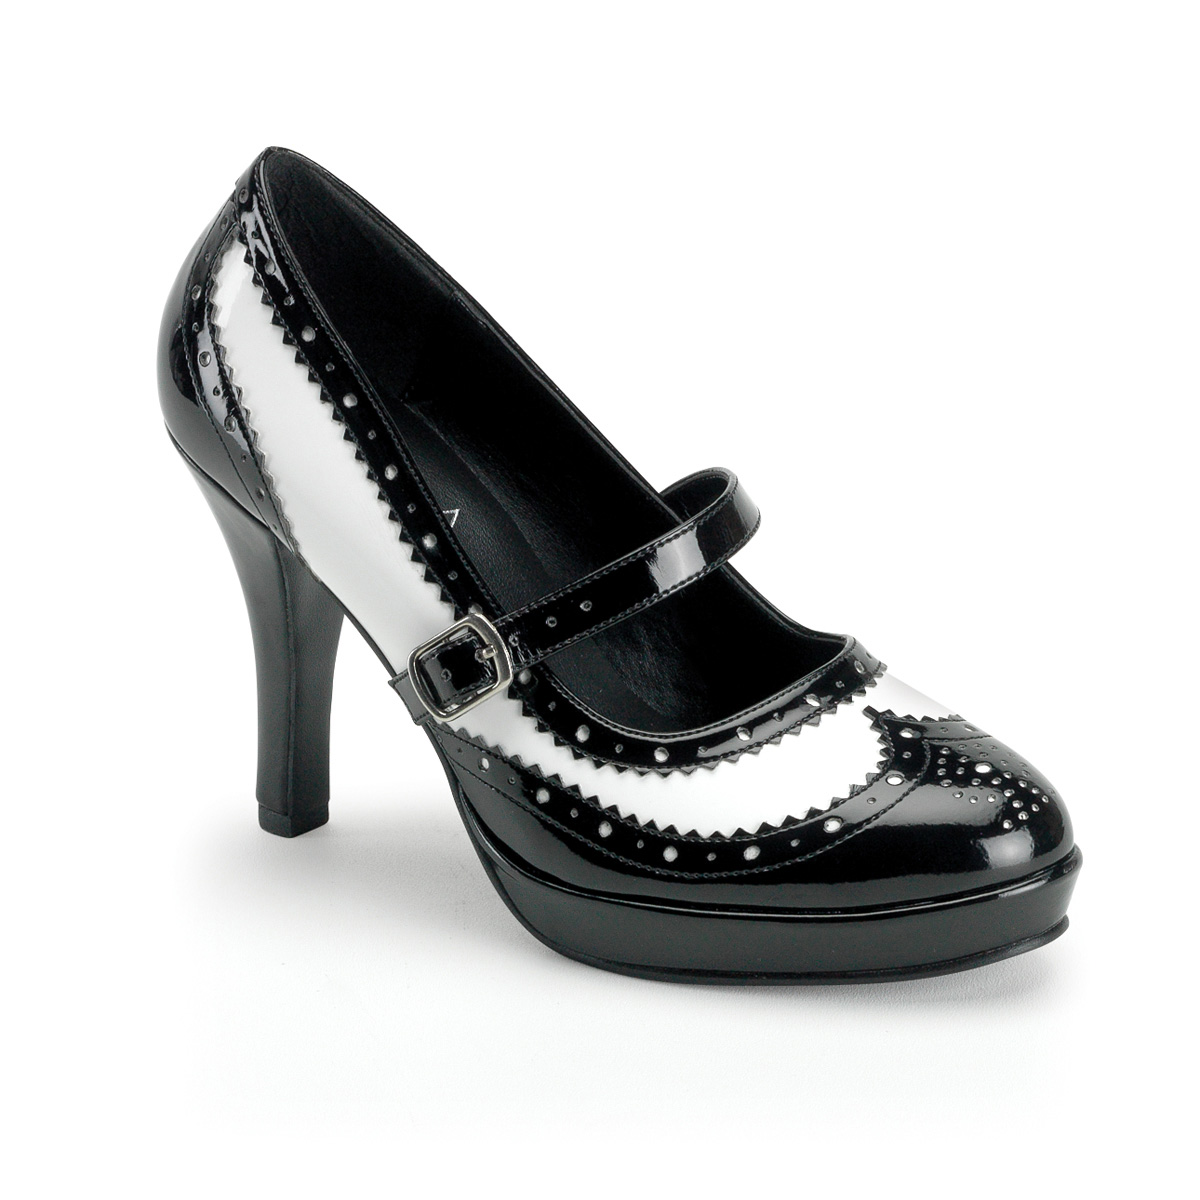 Black 4" gangster maid women's costume shoes